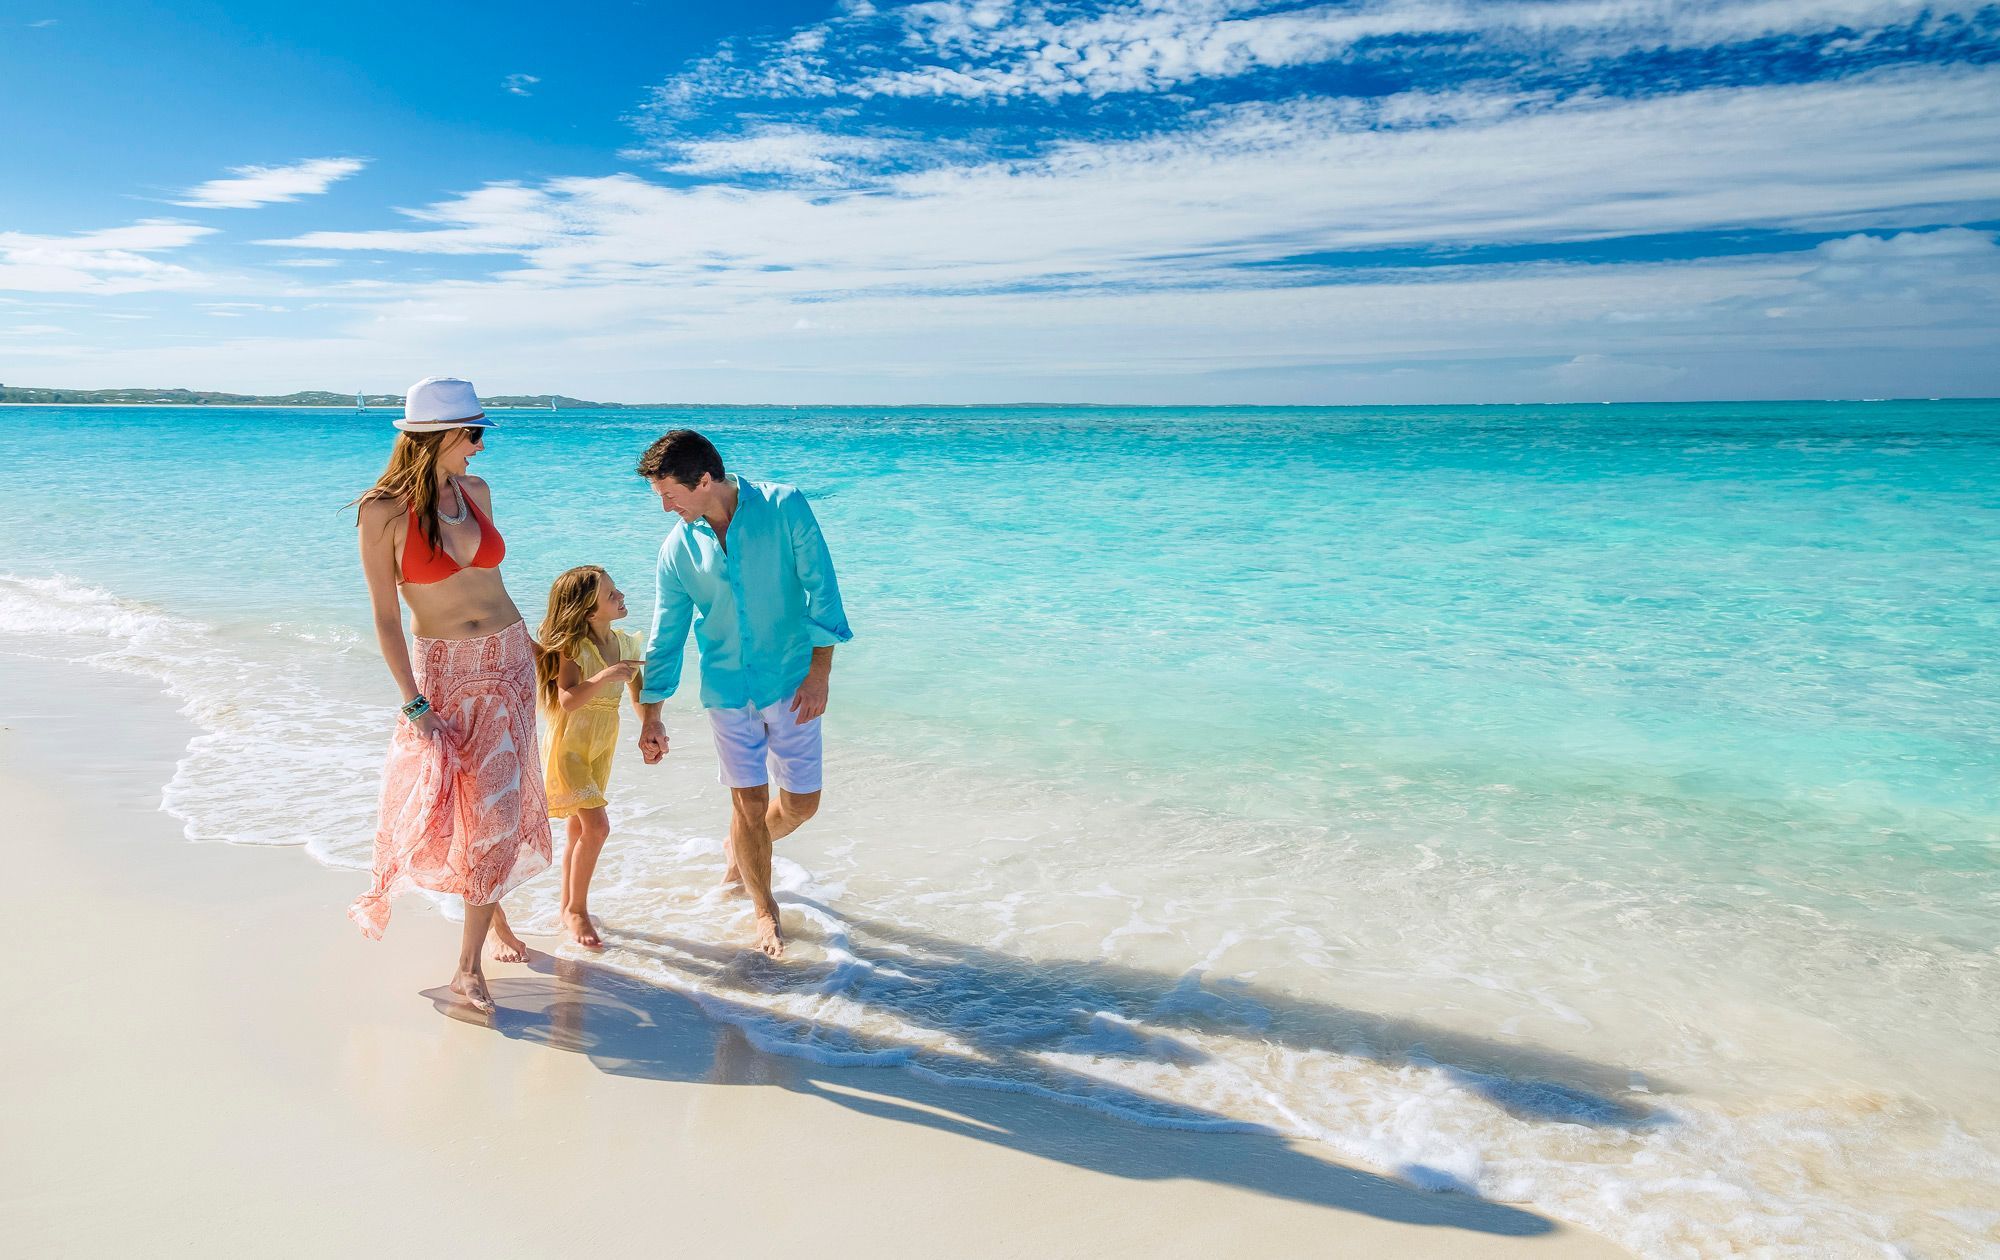 Beaches Turks & Caicos: 10 Things To Know Before You Go